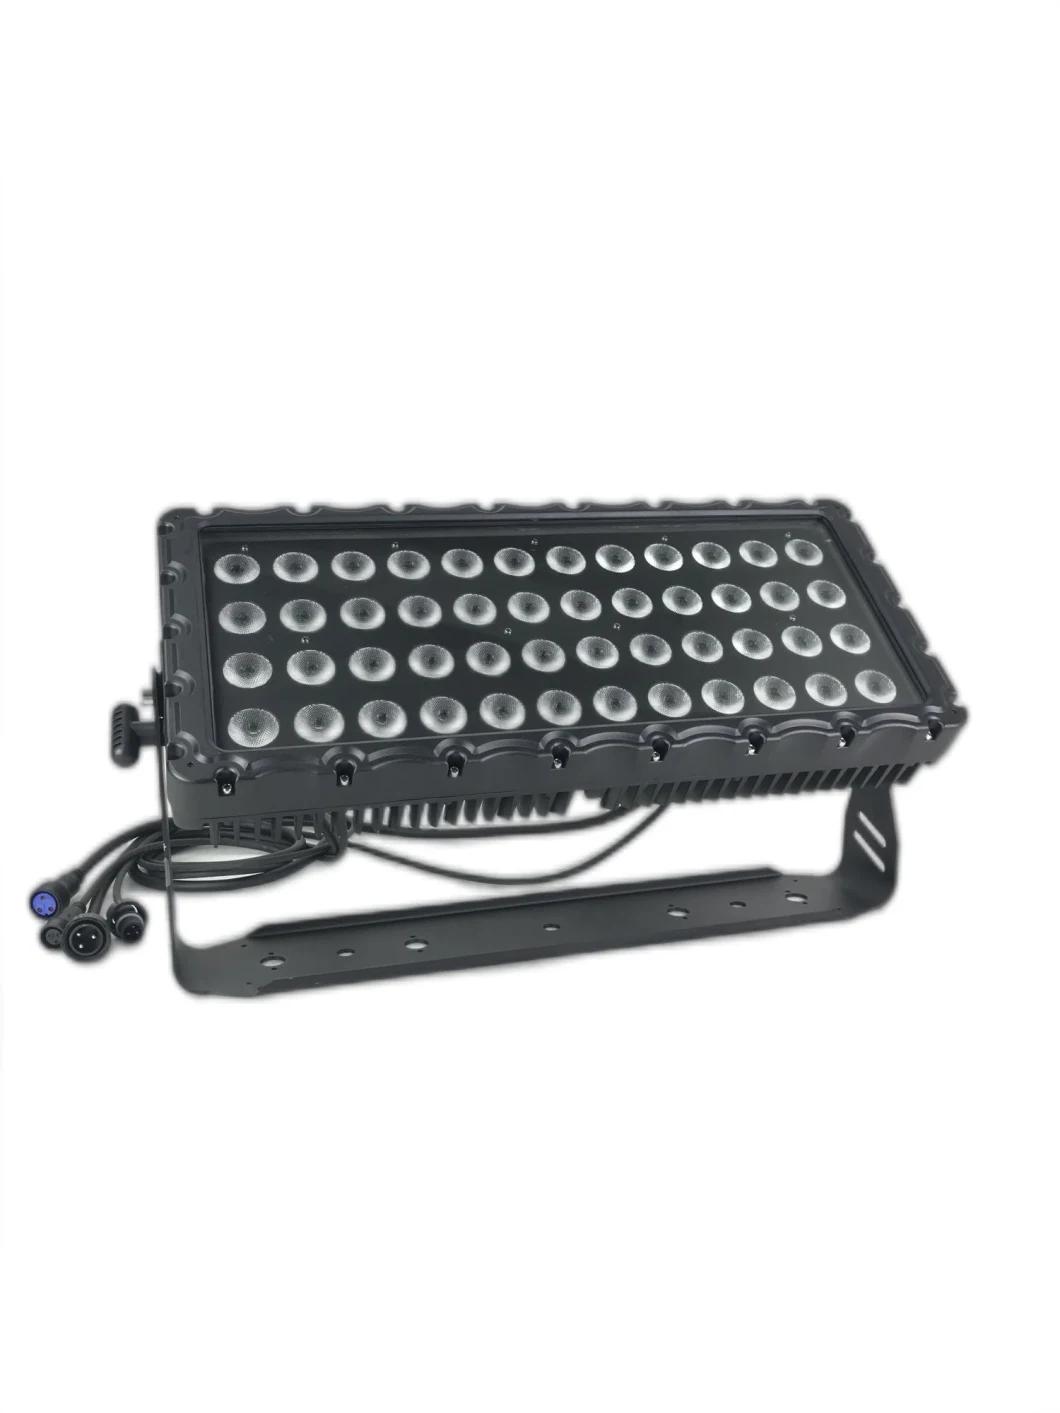 New Waterproof LED Flood Light for Outdoor Stage Builting